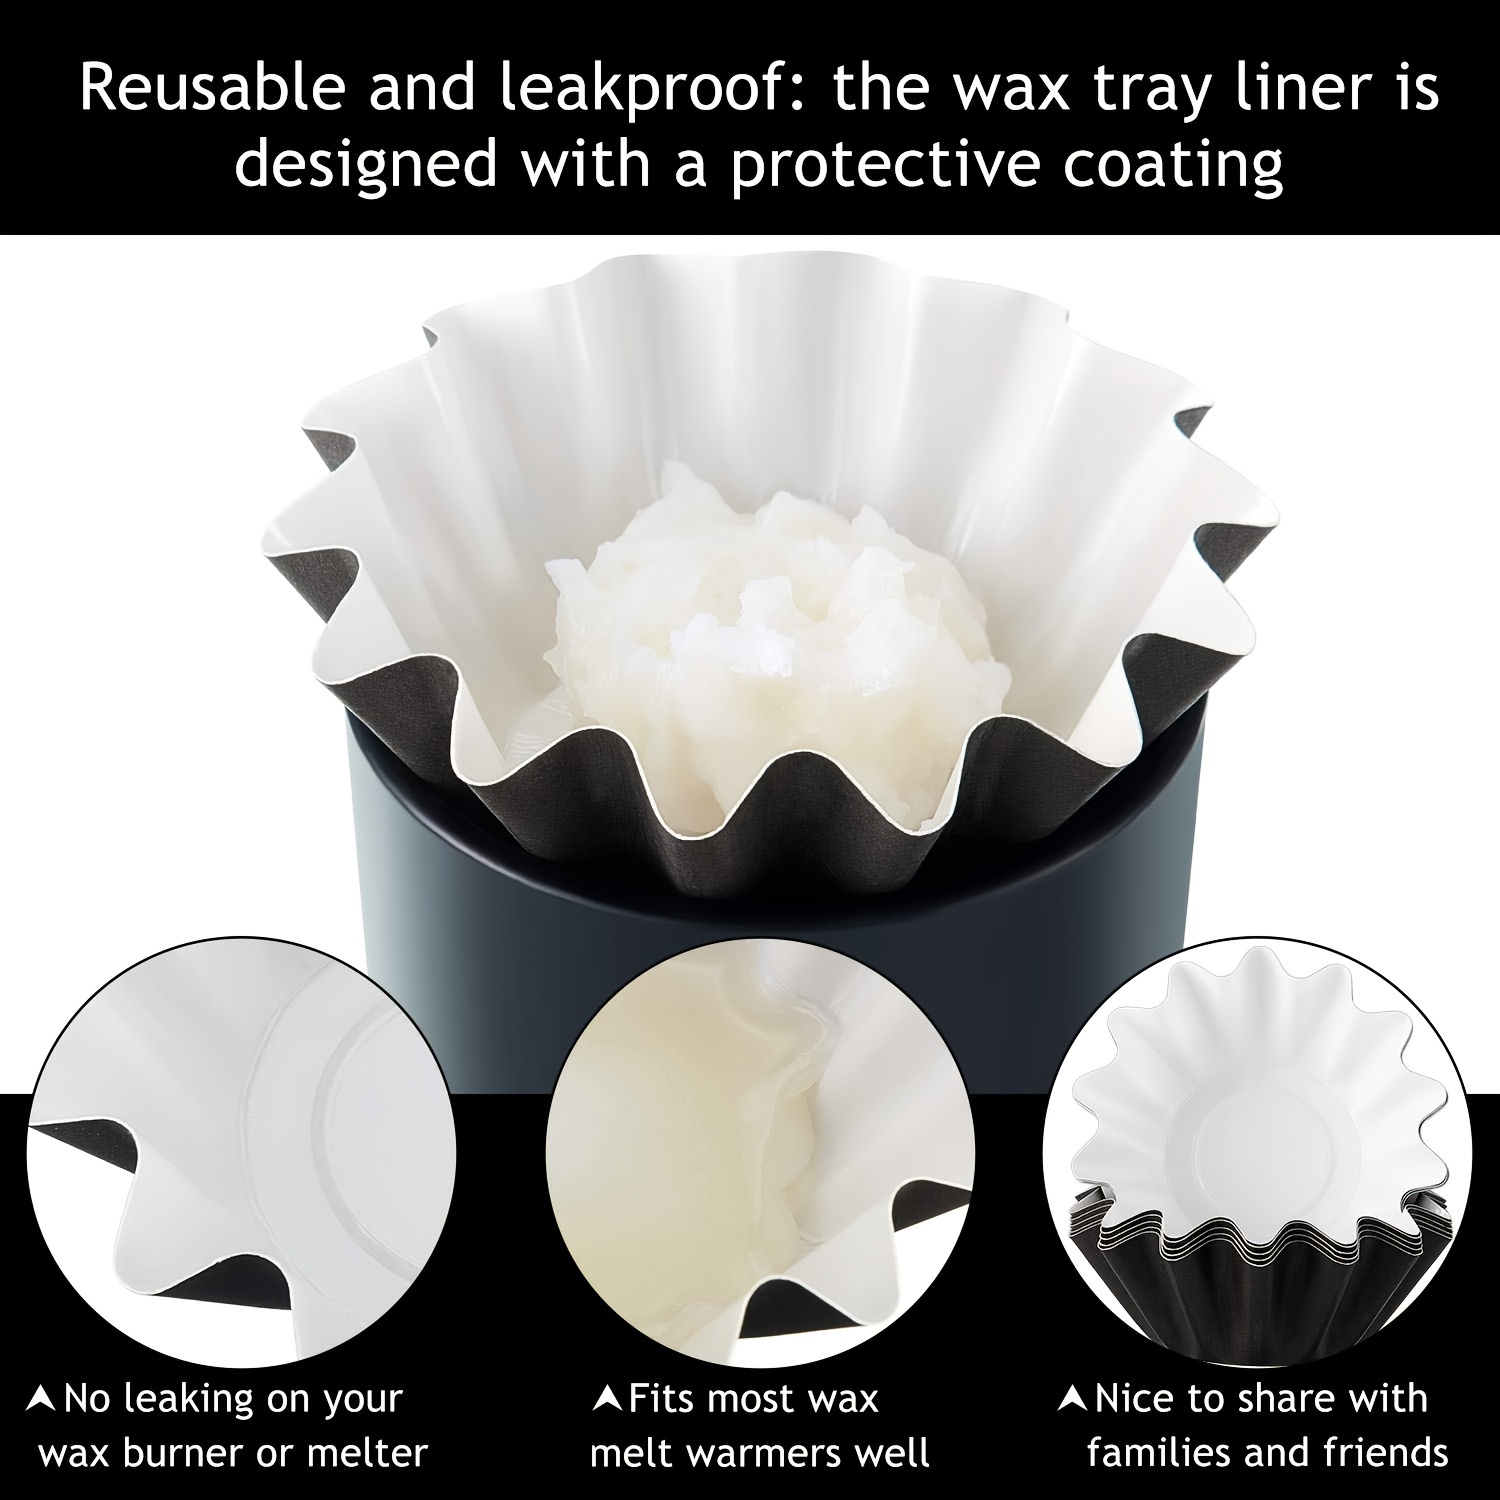 50Pcs Wax Melt Warmer Liners Reusable Leakproof Wax Tray Liners for Plug in  Wax Warmers Wax Melt Burner, 6 Colors Candle Warmer Liners Wax Liners for  Scented Wax Electric Wax Warmers(Black) 